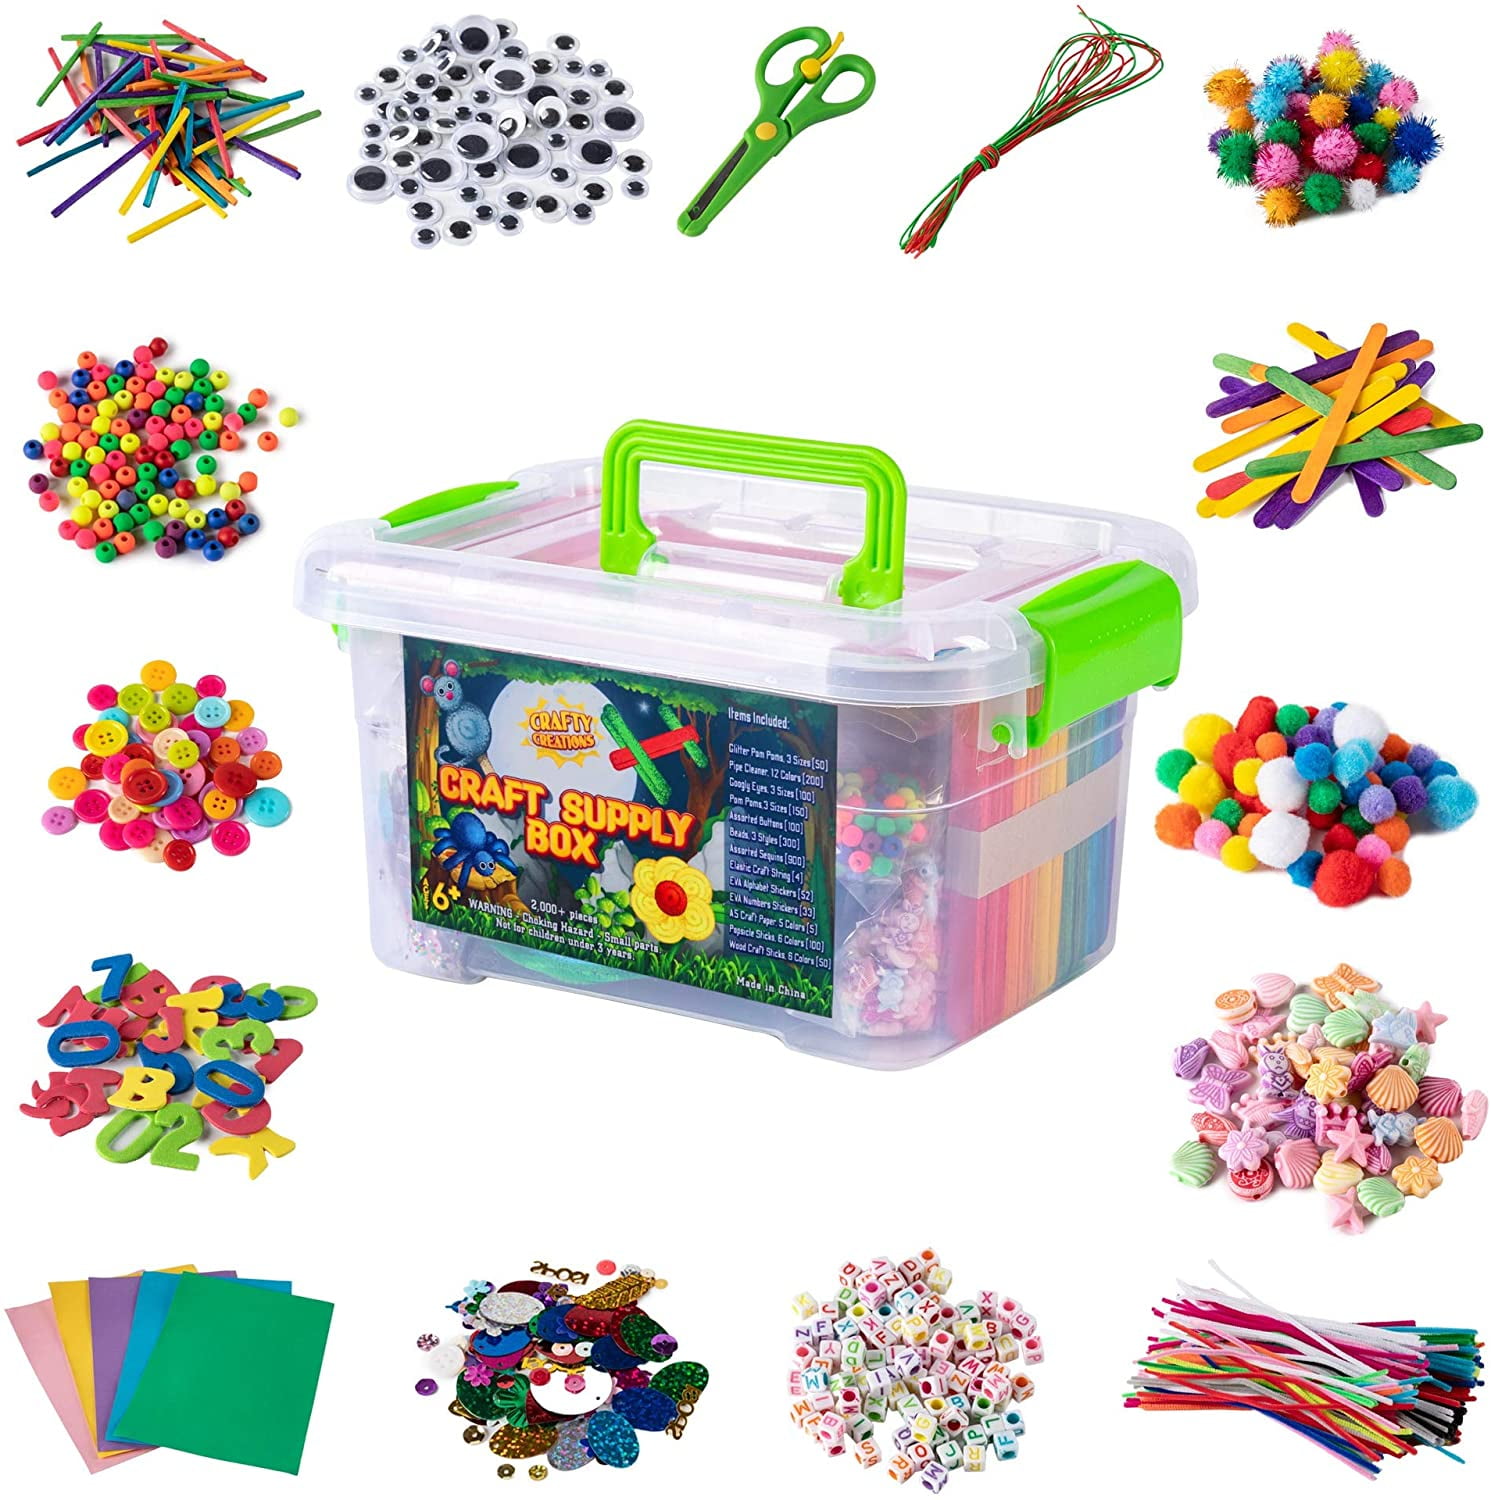 Pom Poms Pipe Cleaners Crafts Supplies Kit Colorful Feather Beads Construction Paper Wooden Sticks Craft Materials Kit for Kids Googly Eyes 